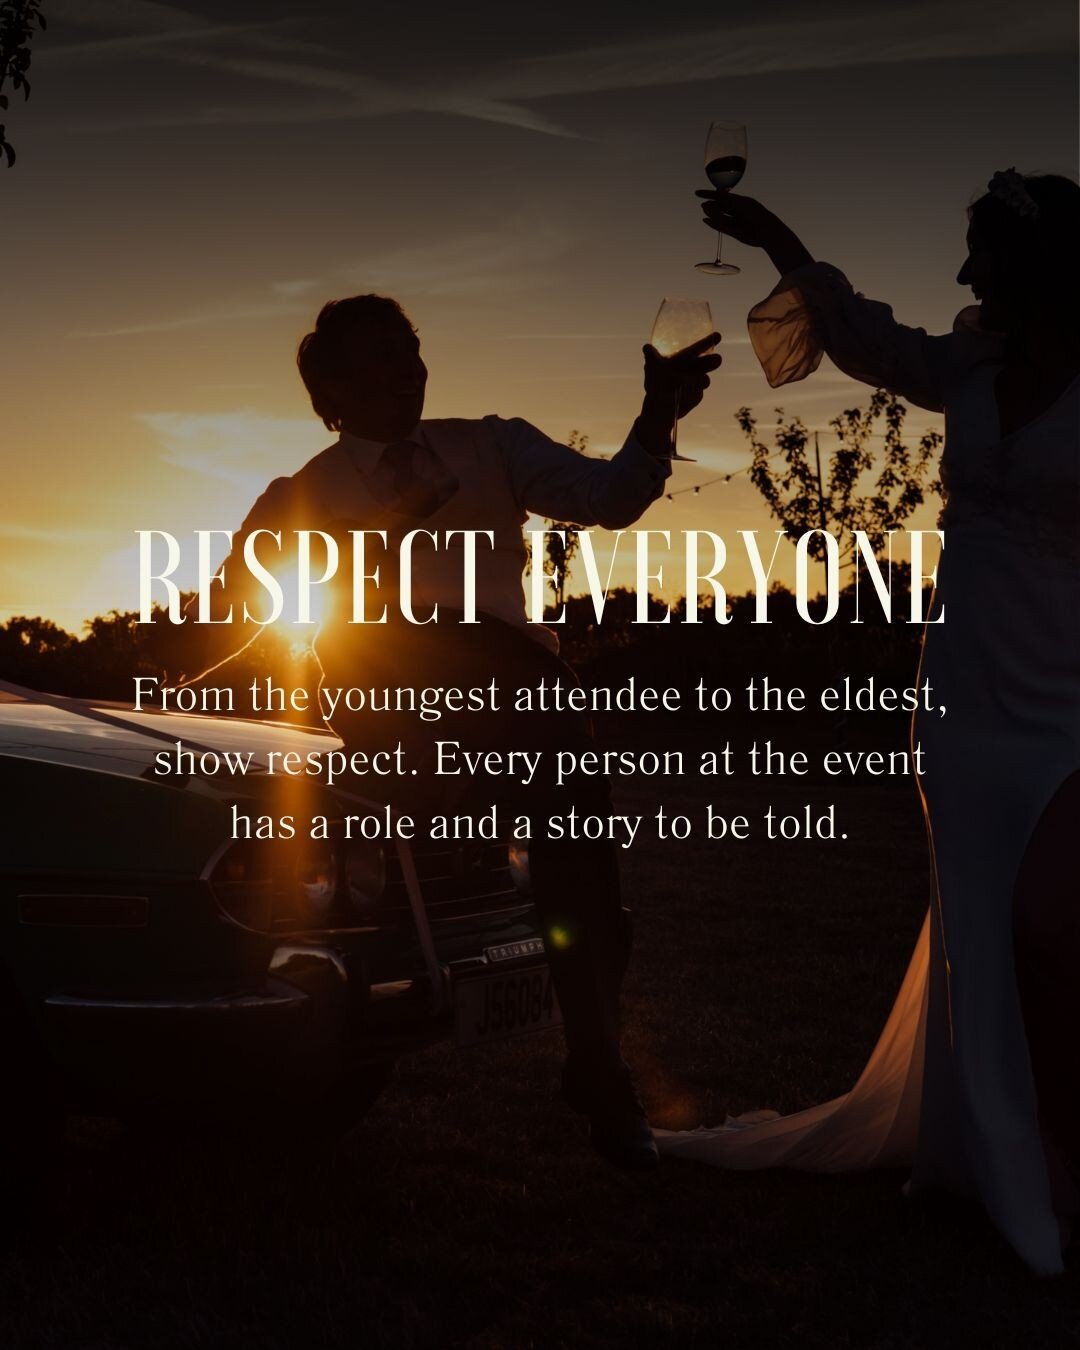 &quot;Treat everyone with the same respect.&quot; ⁠
⁠
Every event weaves a unique tapestry of moments, from the youngest child's innocent giggles to the eldest member's cherished memories. Everyone makes the day unique, whether it's the shy flower gi